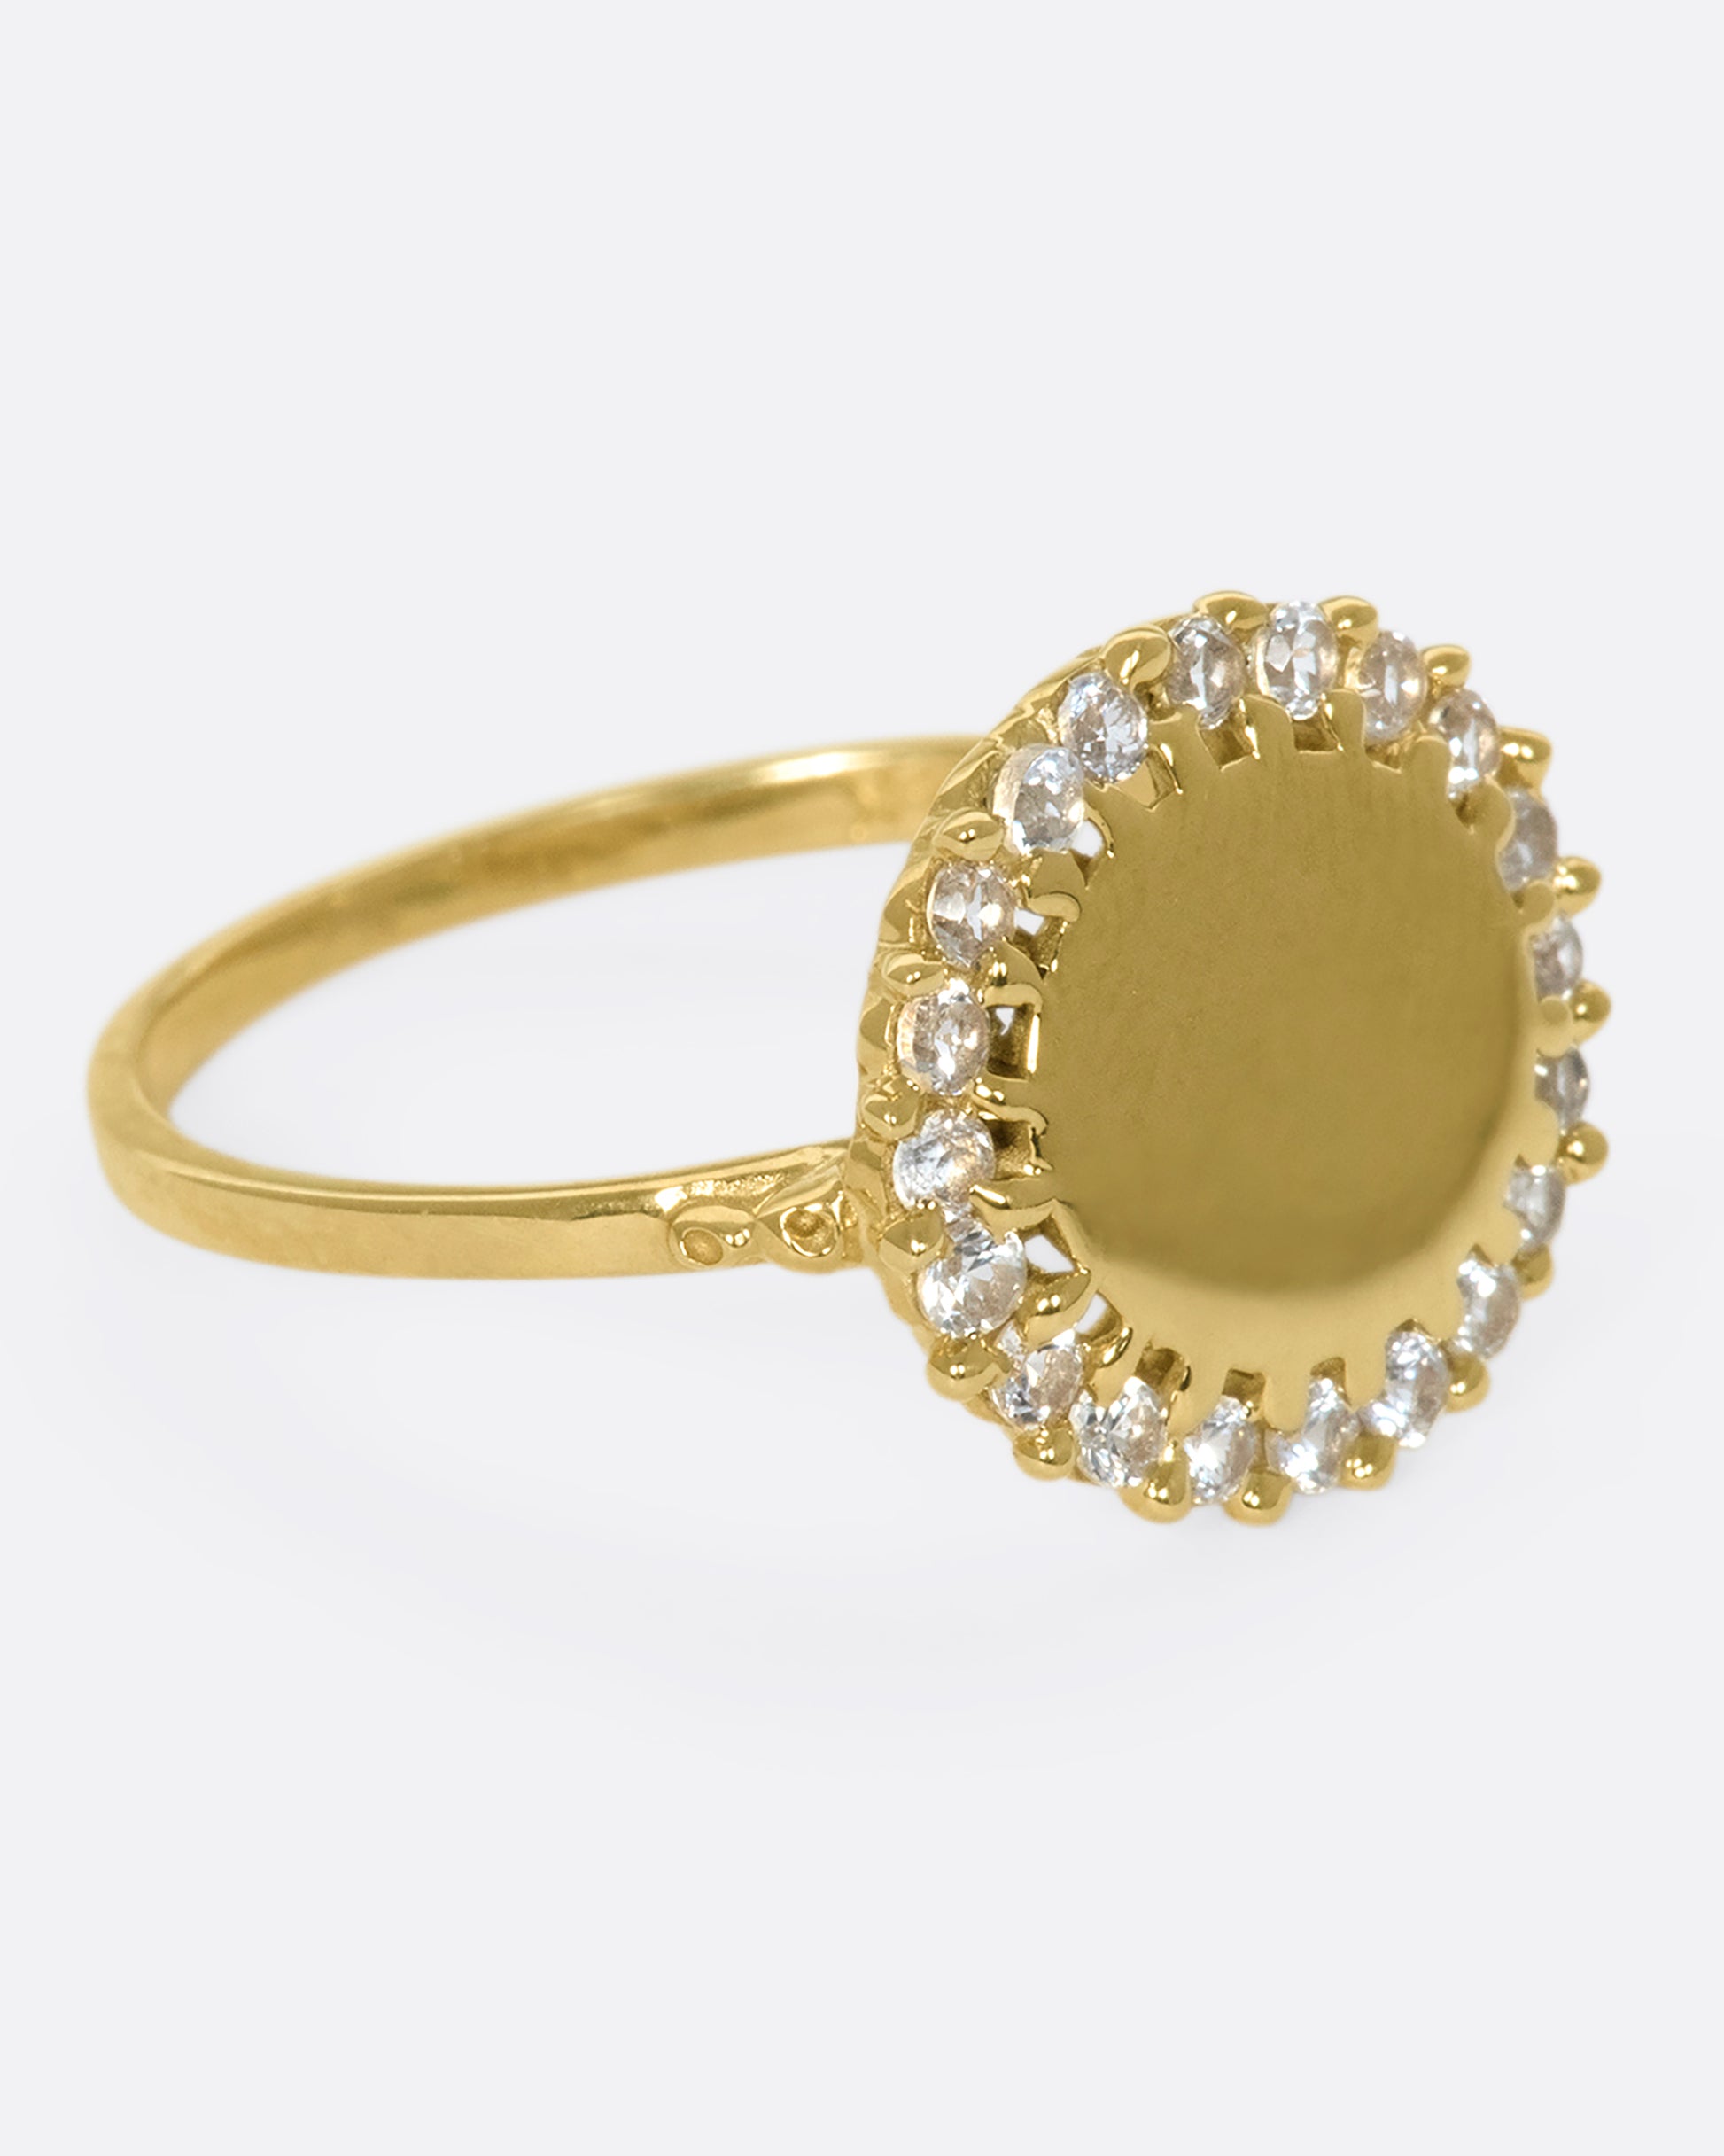 A 14k gold circle ring with a white diamond halo